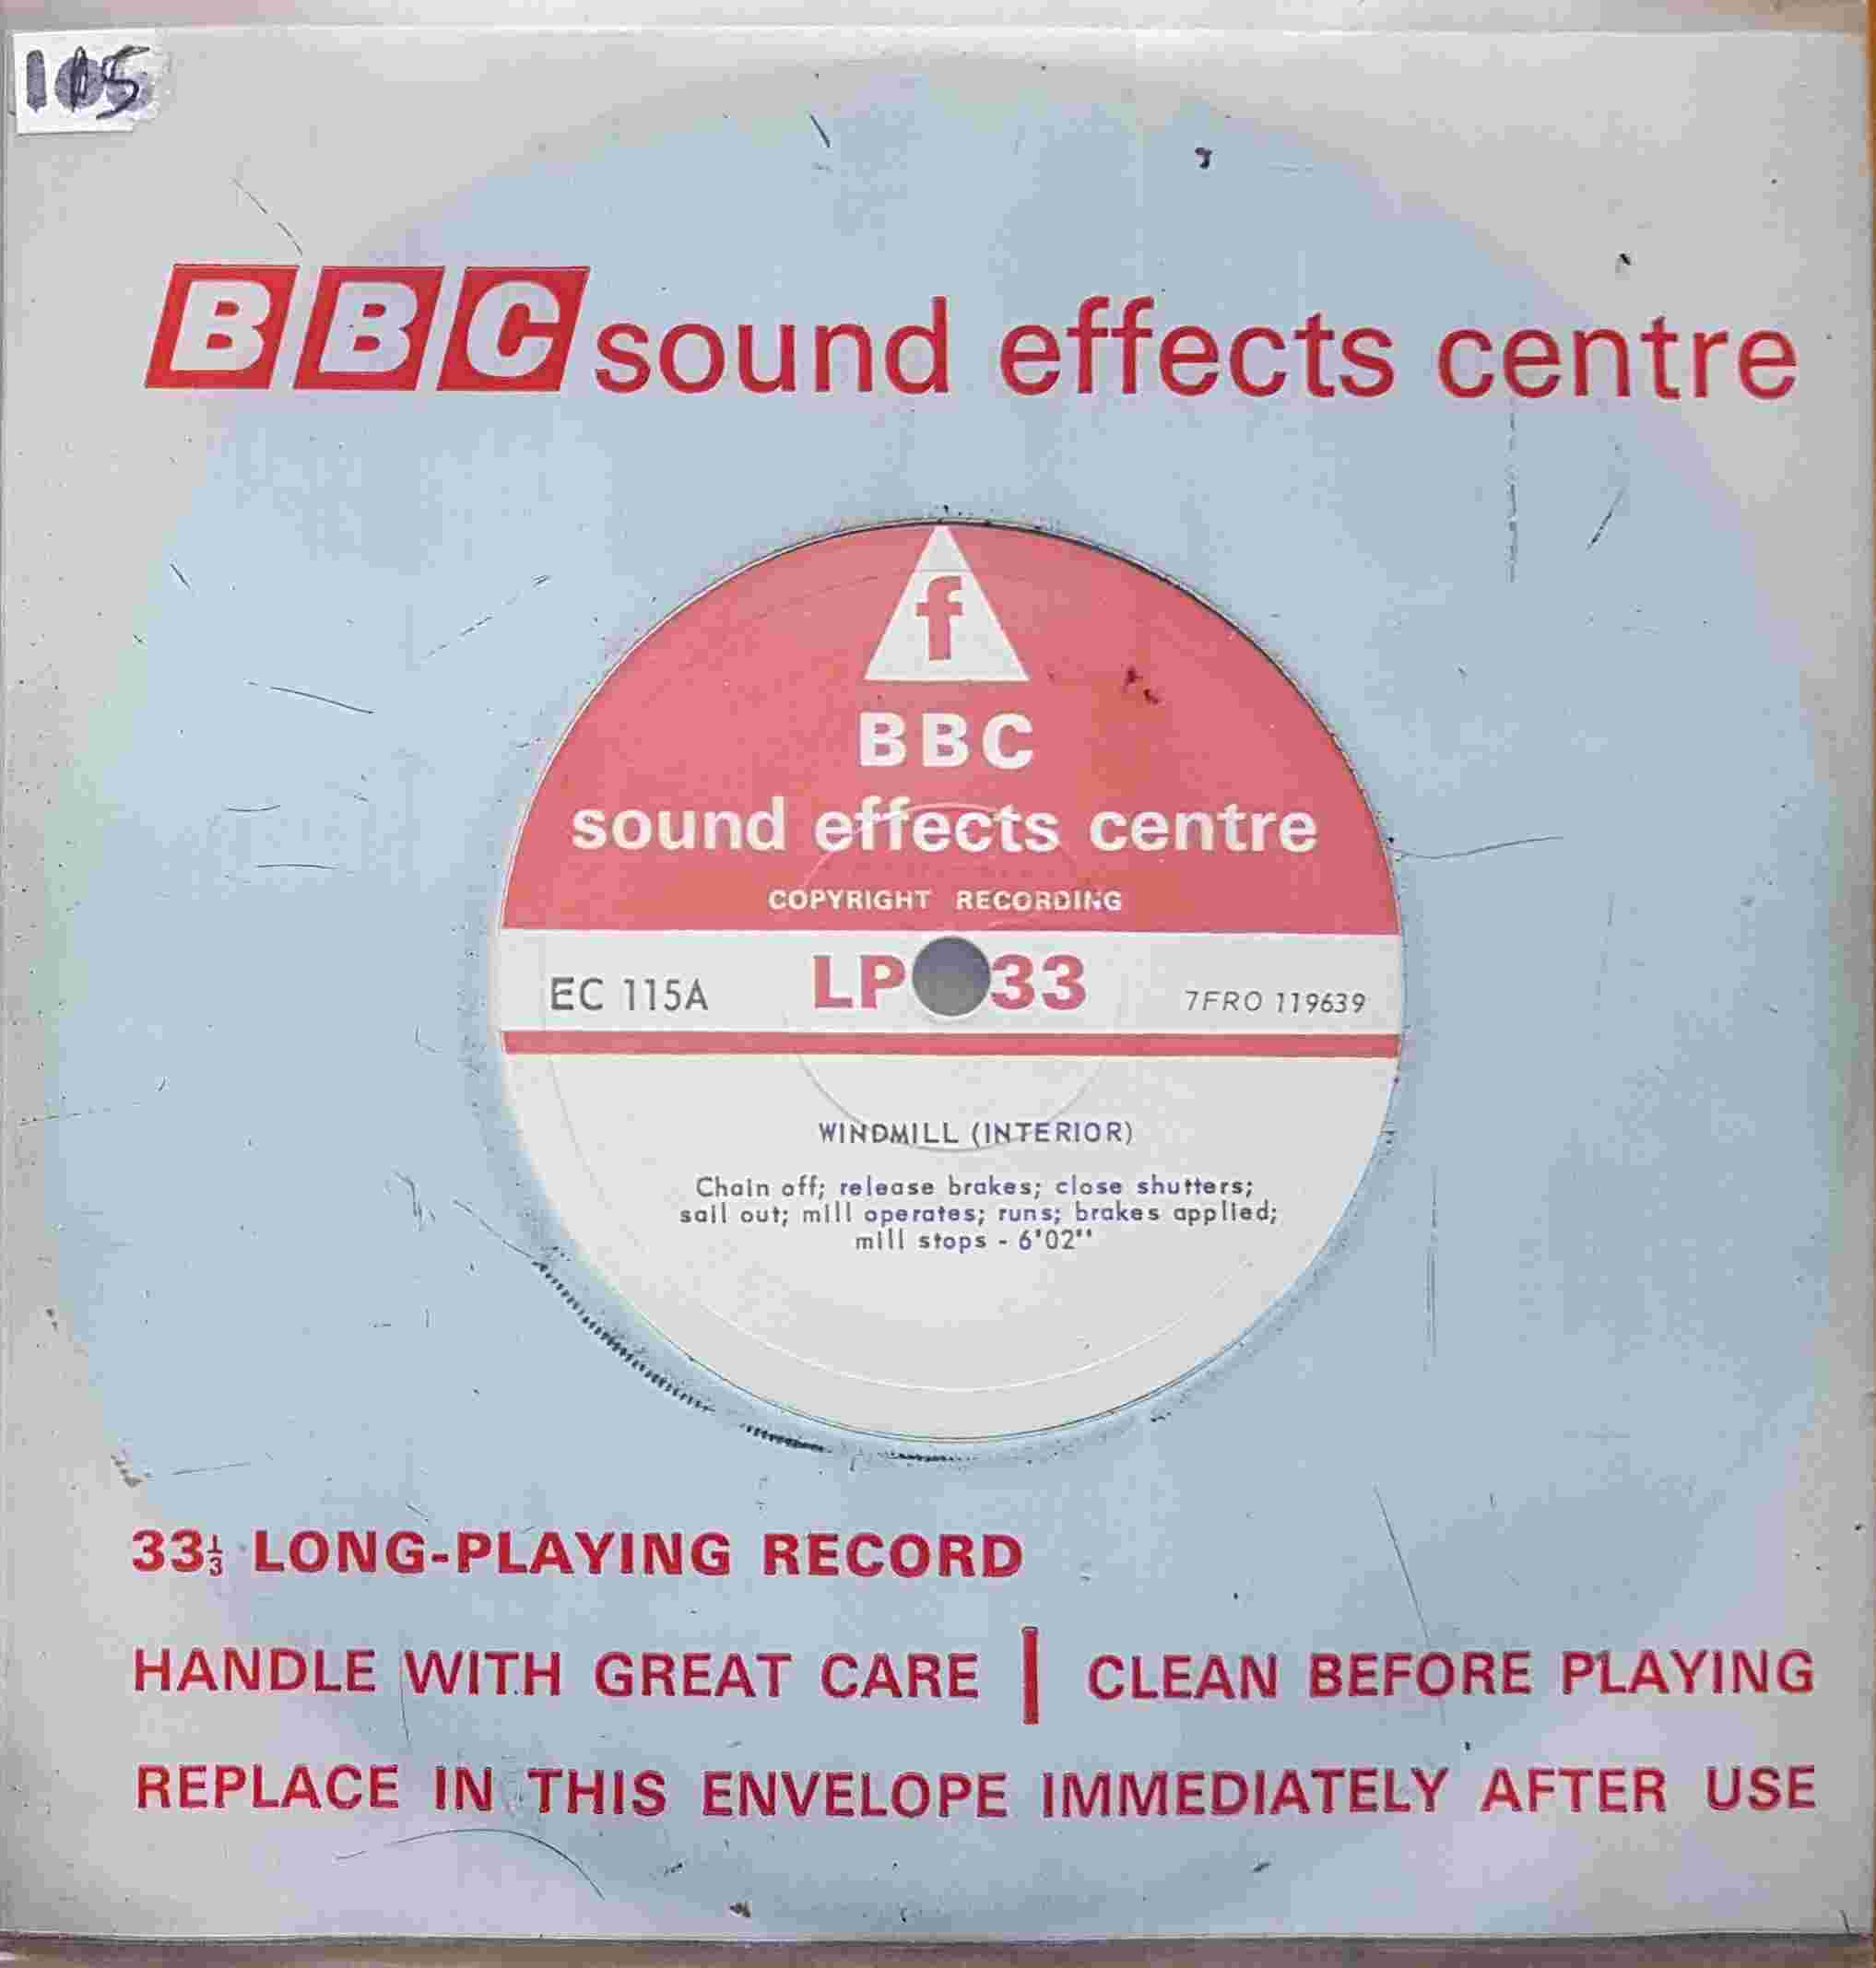 Picture of EC 115A Windmill by artist Not registered from the BBC singles - Records and Tapes library